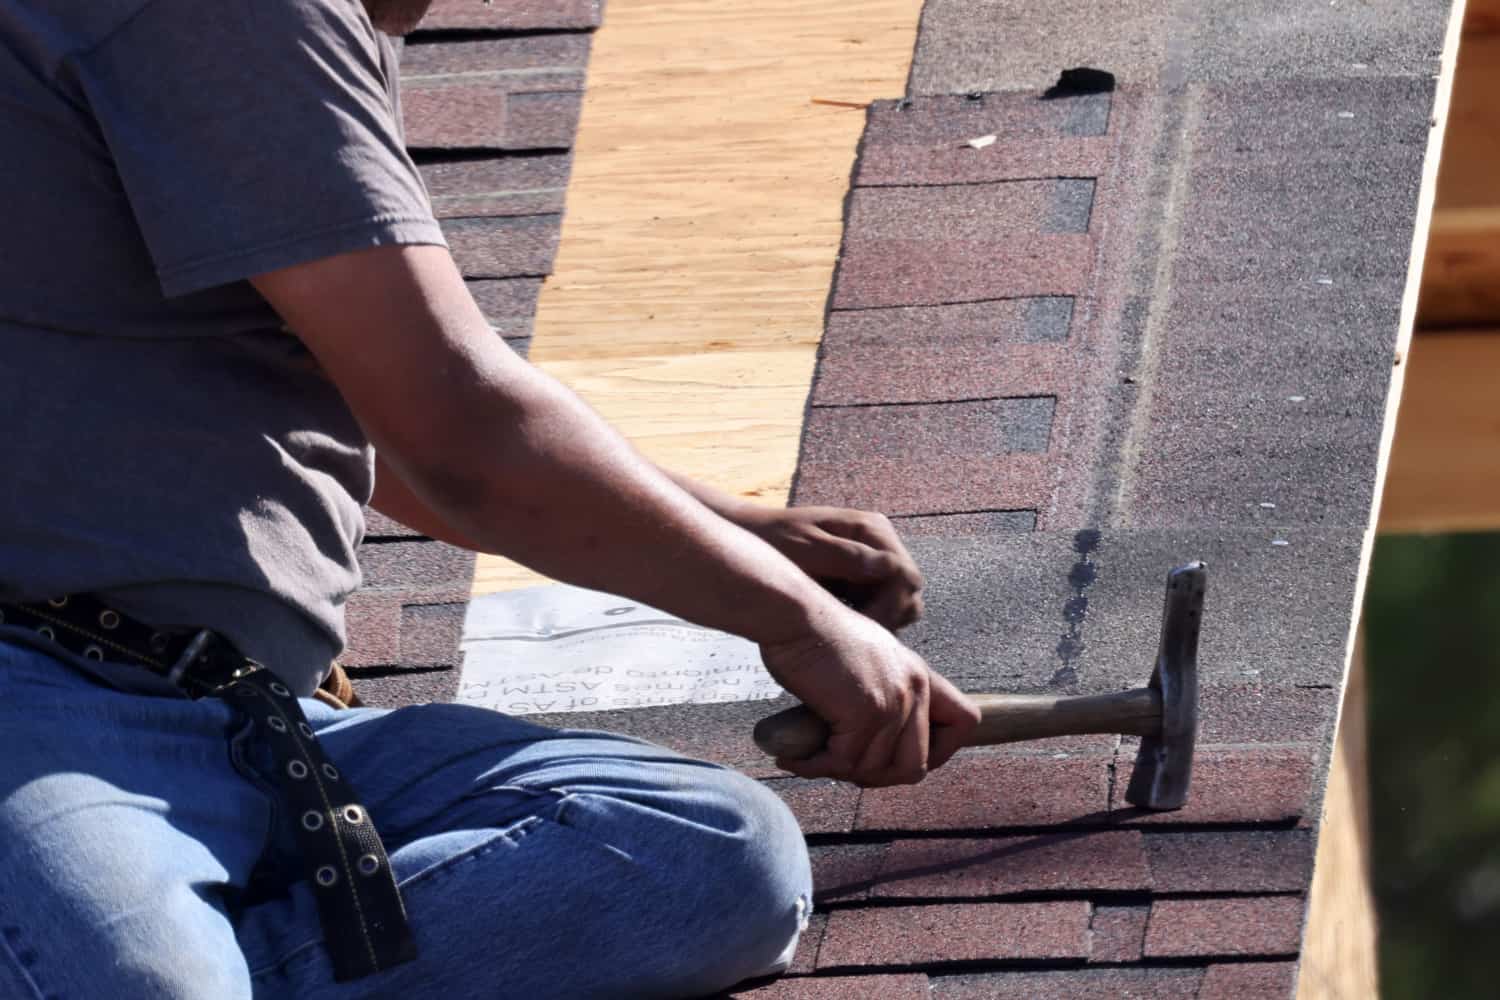 Man nailing shingles on roof with roofing hammer